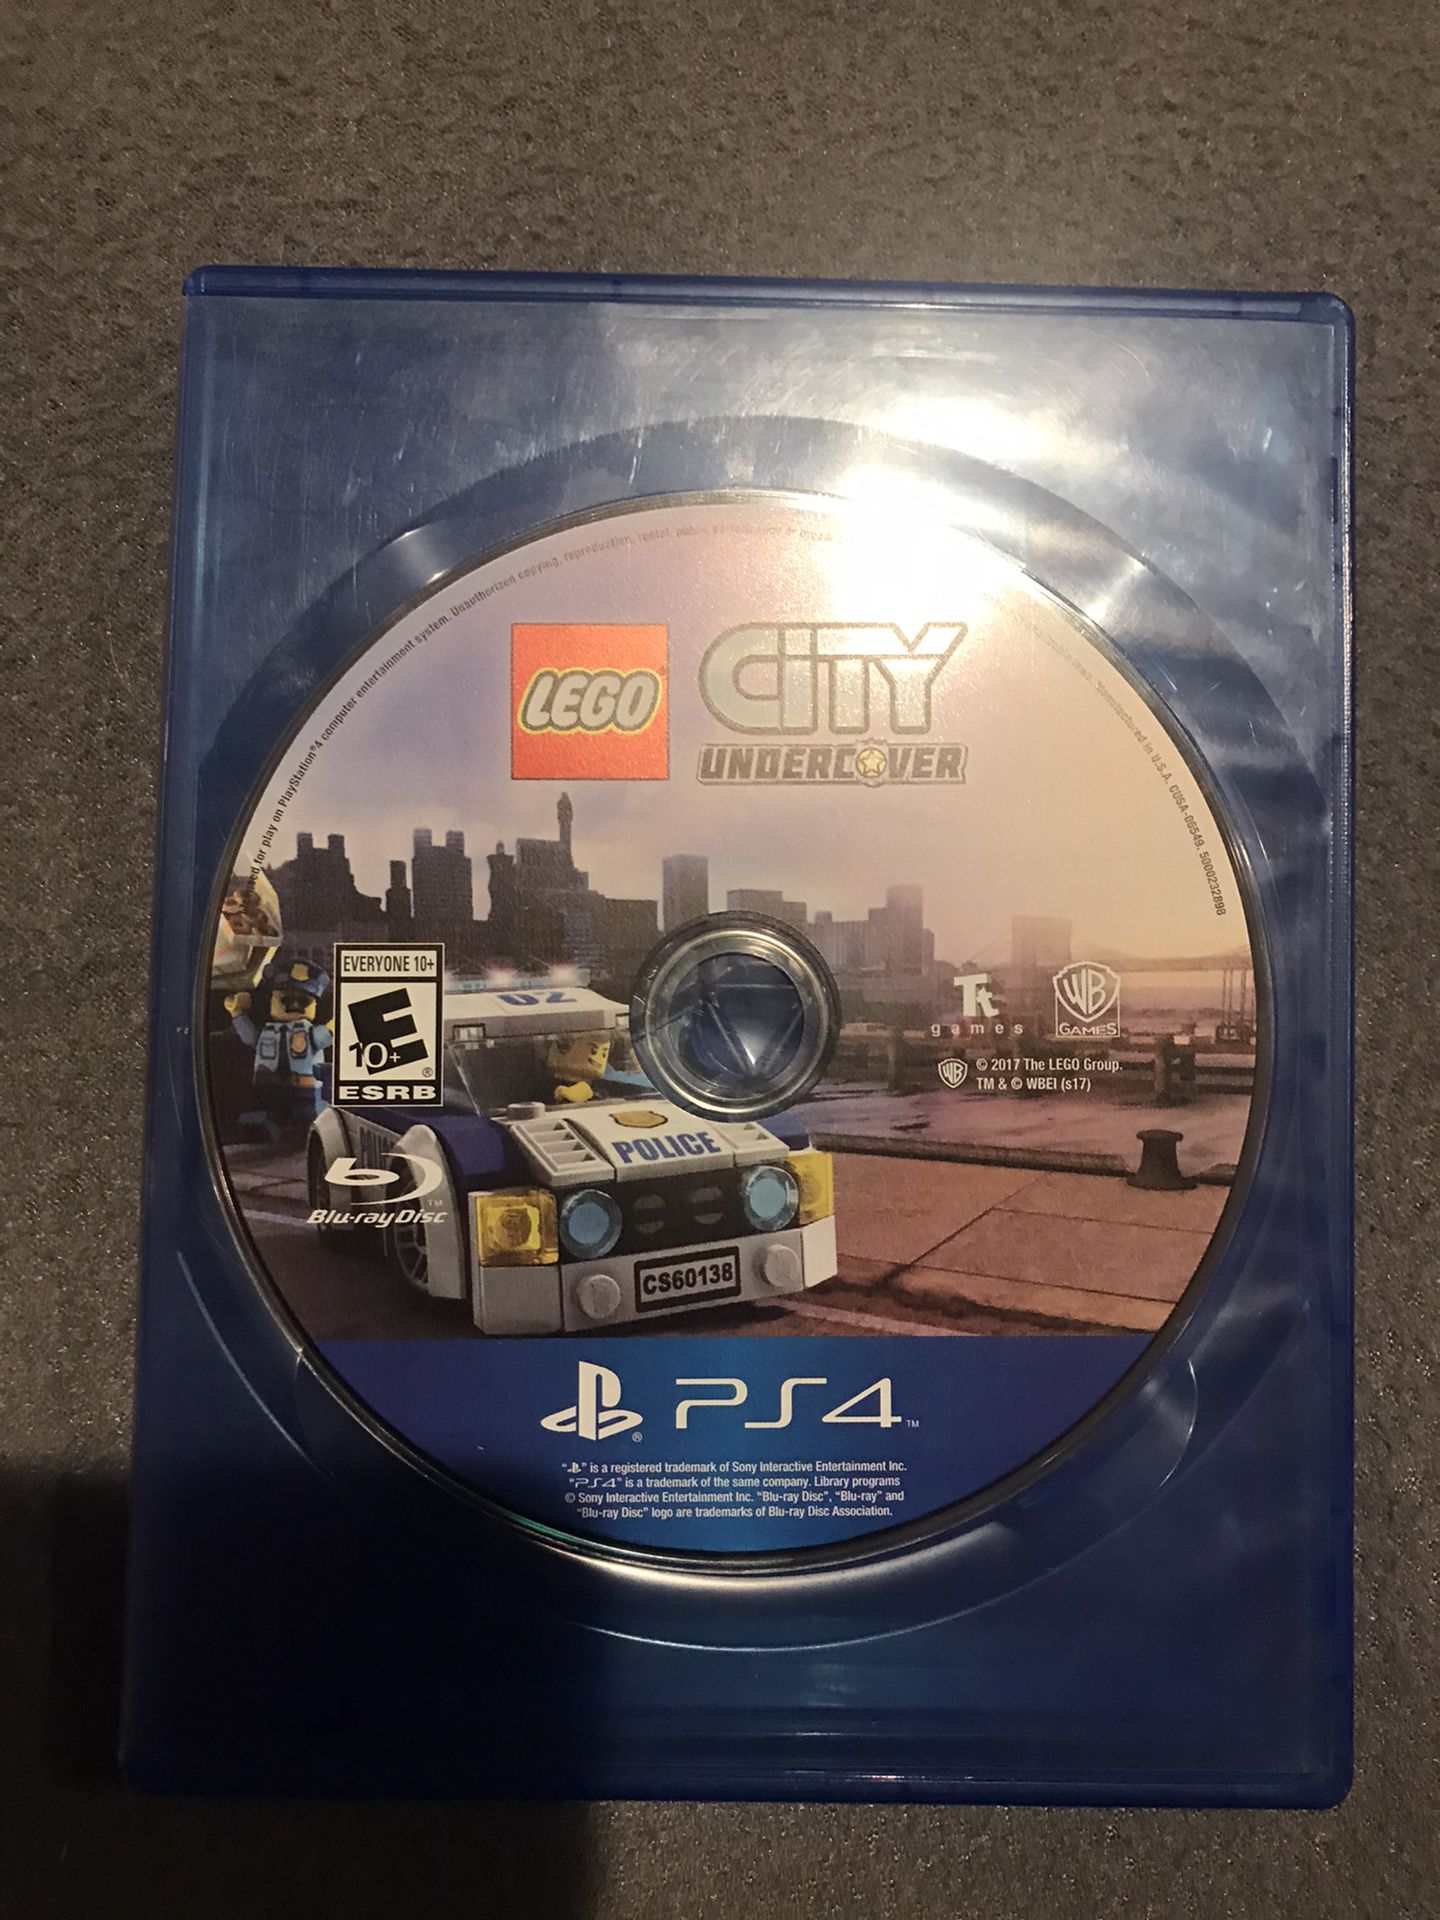 LEGO City PS4 game